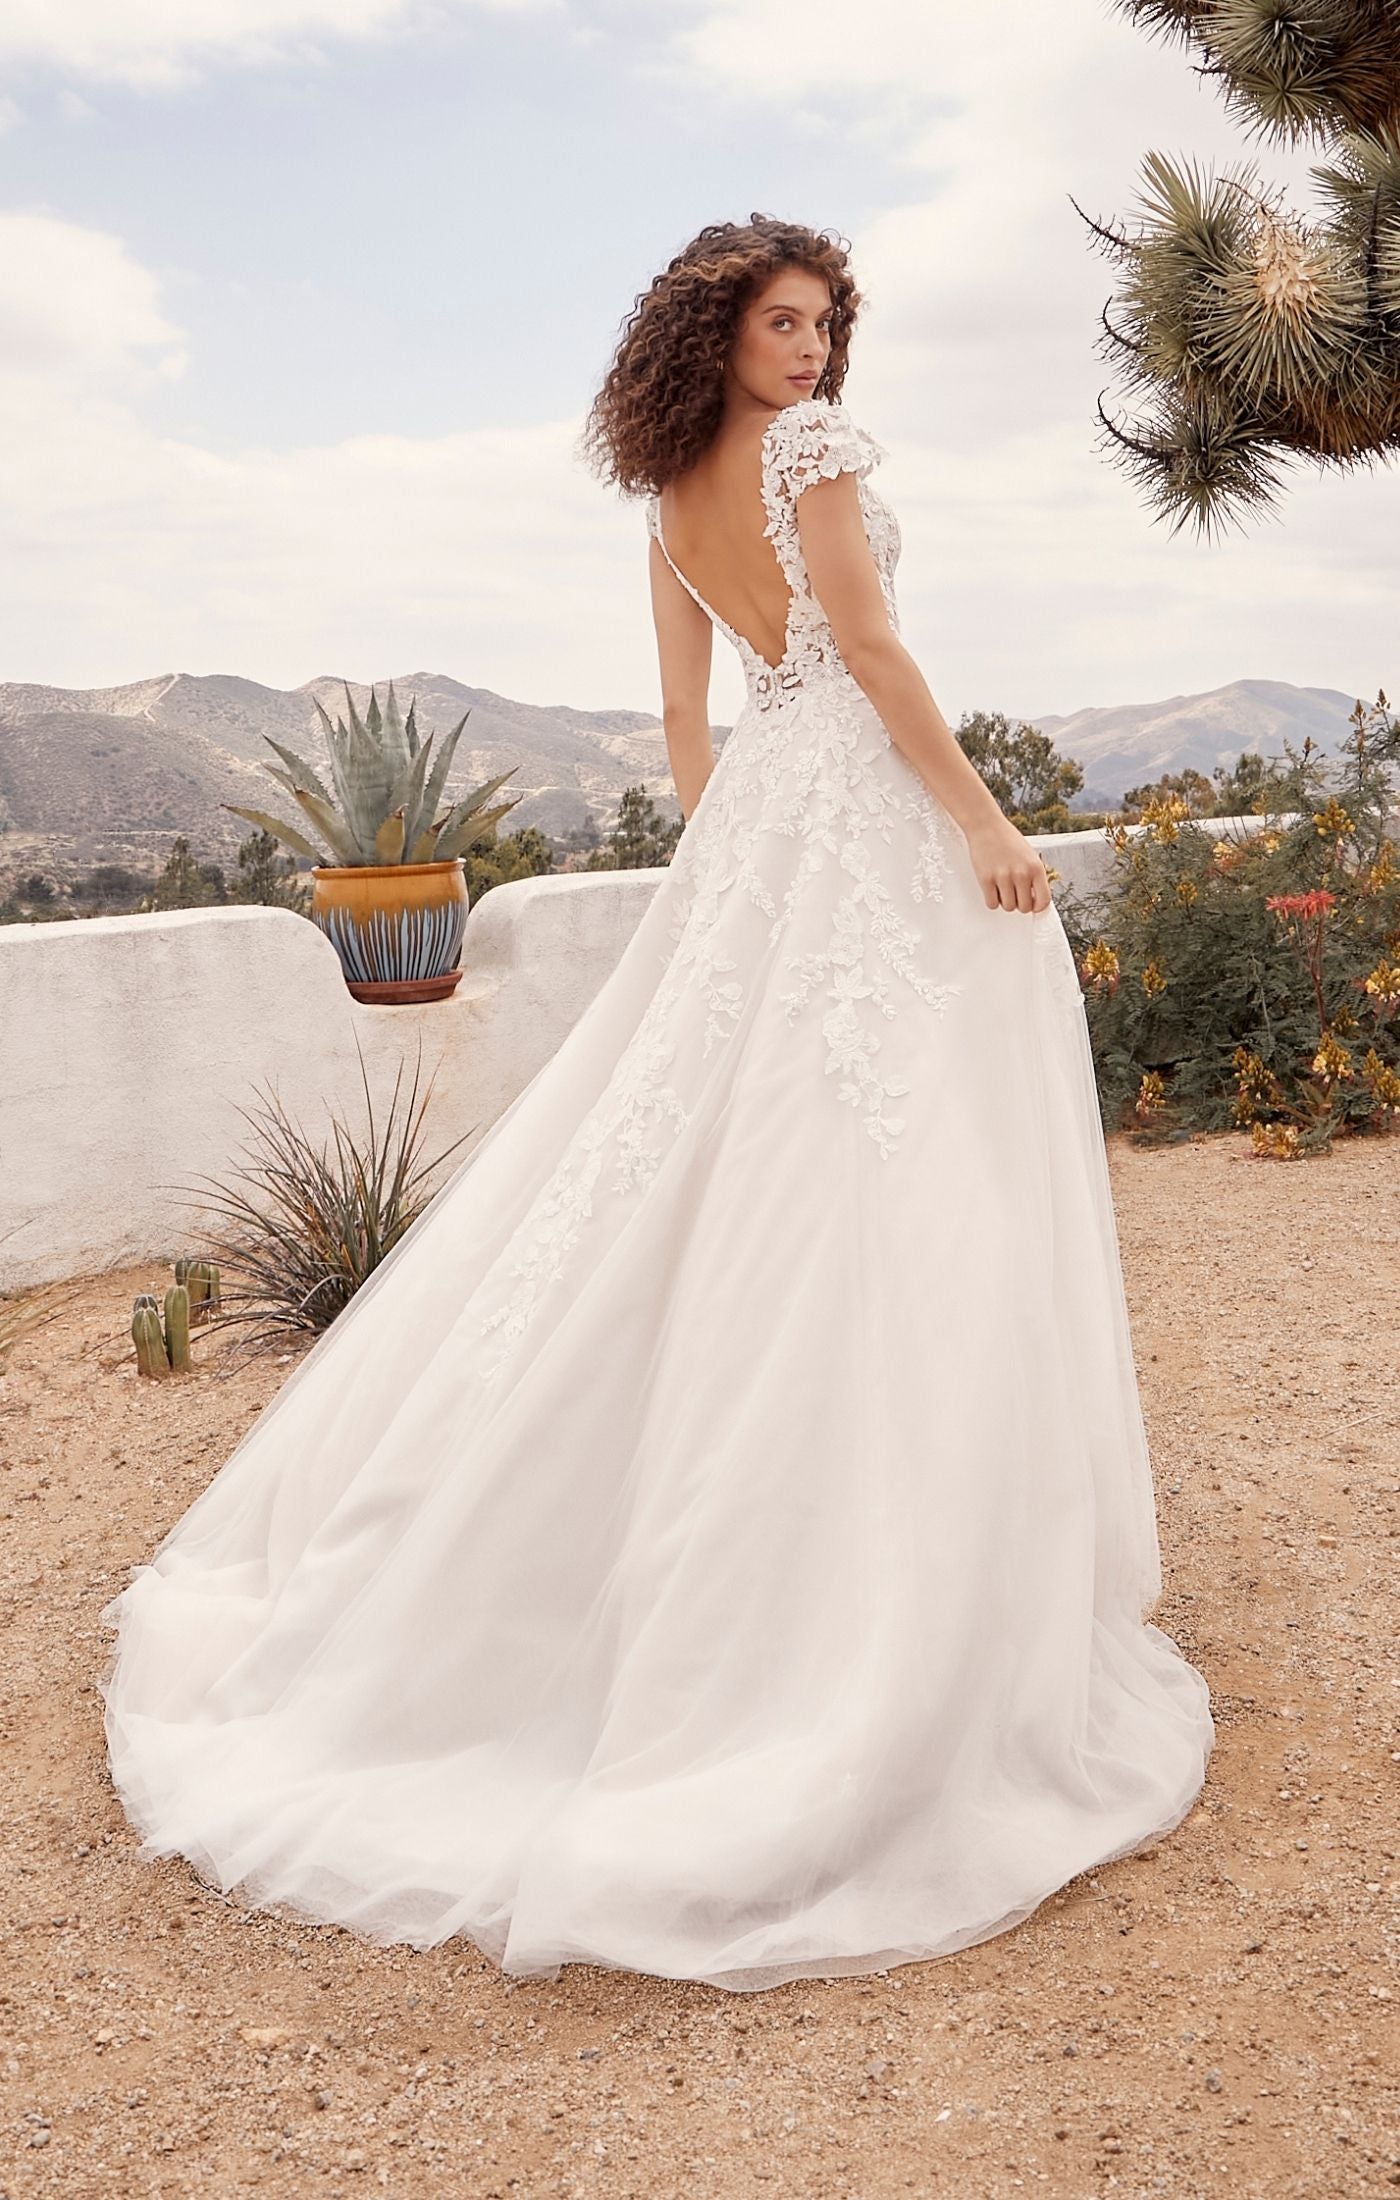 Casablanca Beloved BL435Rusty A-Line Low Back Cap Sleeves V-Neck 3D Appliques Floral Embroidered Train Wedding Gown. Embodying all things romance, Rusty is for the bride who wants to feel like she’s floating on cloud nine. Her A line shape with layers of organza, beaded floral lace and luxurious lining make this dress so divine to wear. 